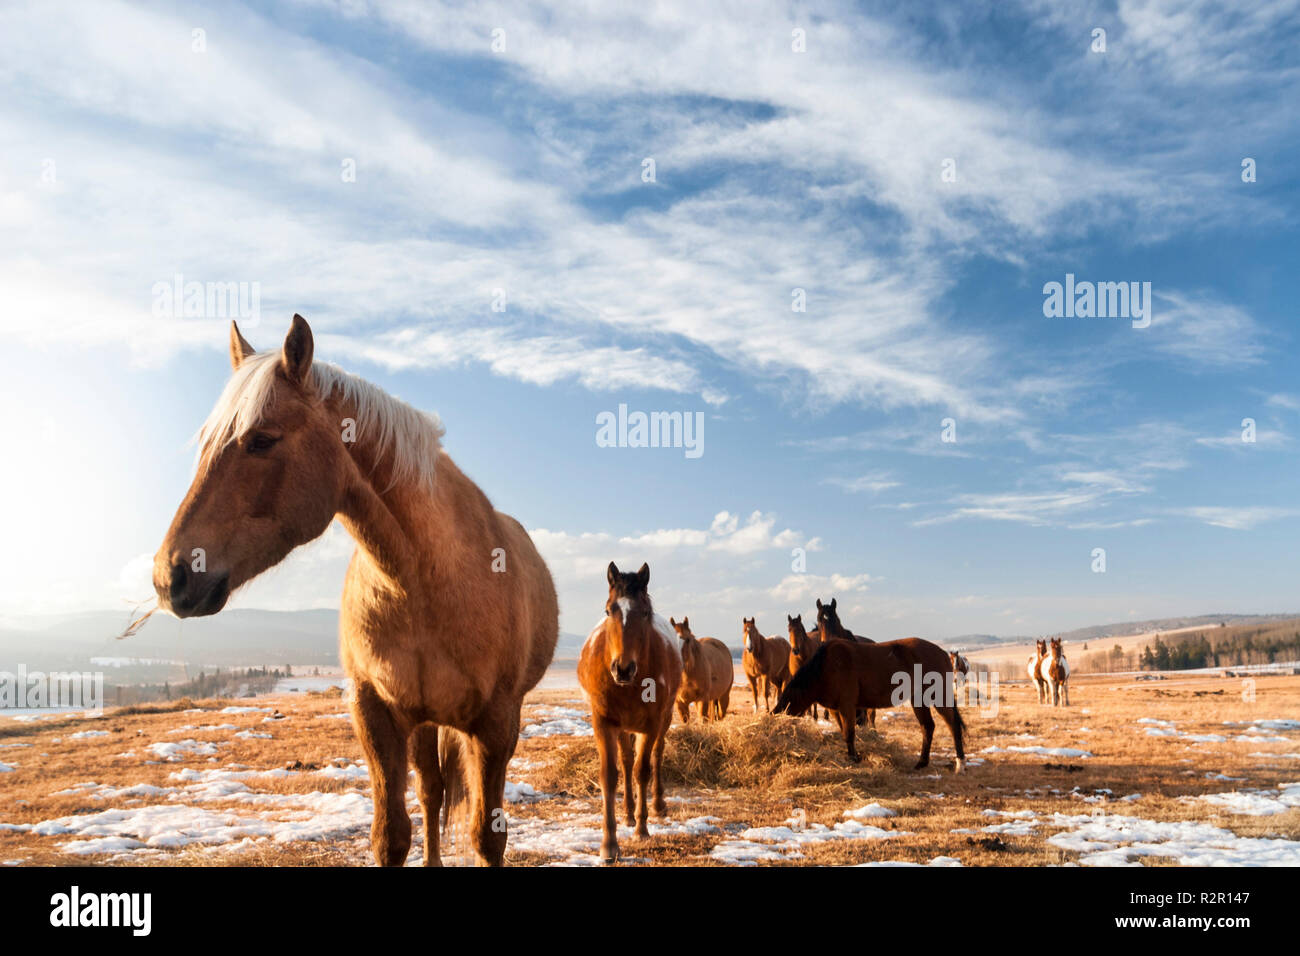 Herd of horses in winter, wide landscape in Rocky Mountains foothills, Alberta, Canada, Stock Photo